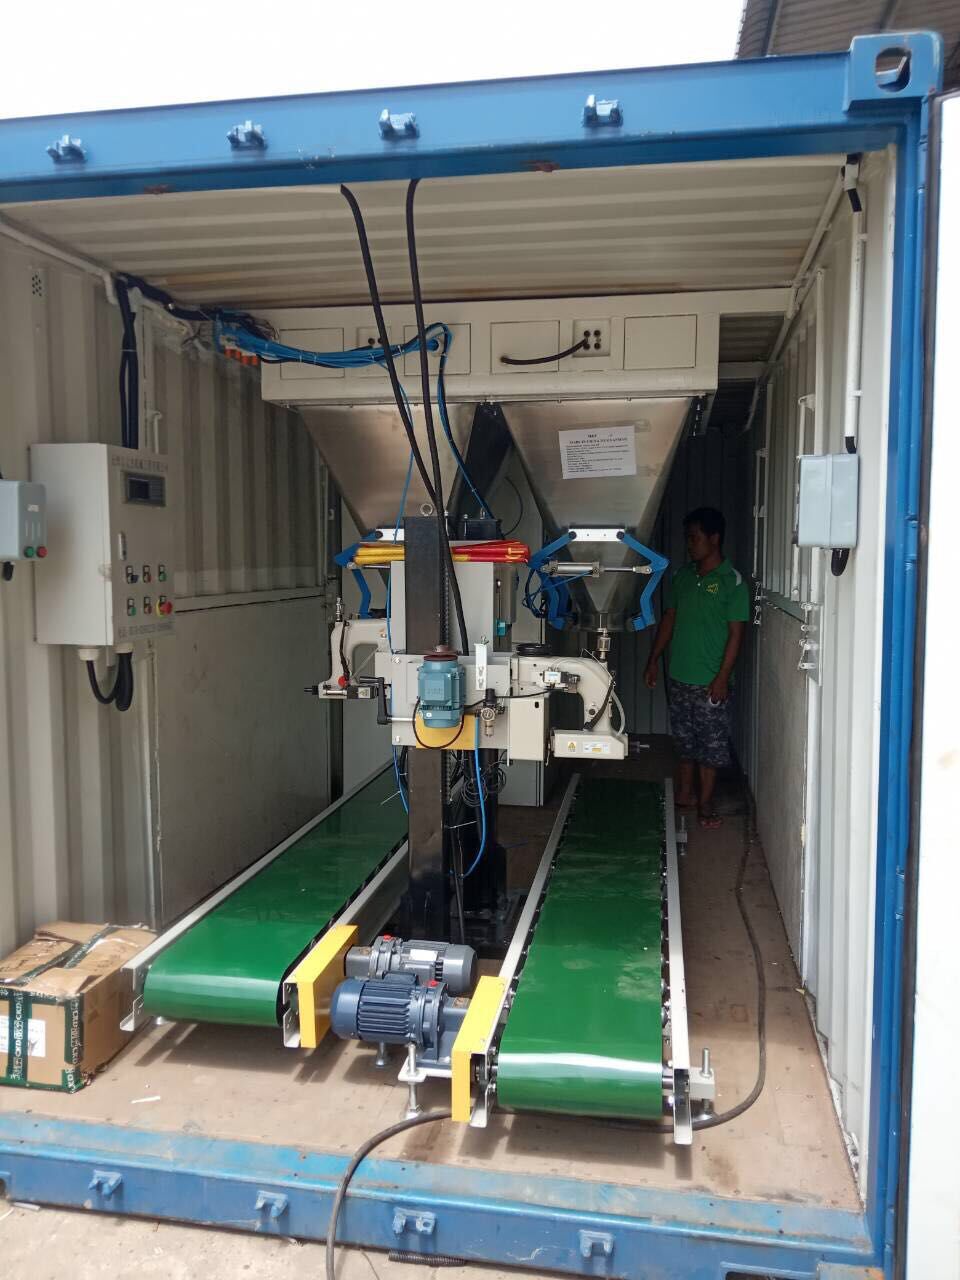 MOBILE Soya, Maize, Wheat BAGGING MACHINES containerized bagging system Mobile Bagging Unit MOBILE BAGGING MACHINES for Grains, pulses, iodised salts, sugar Containerised bagging system